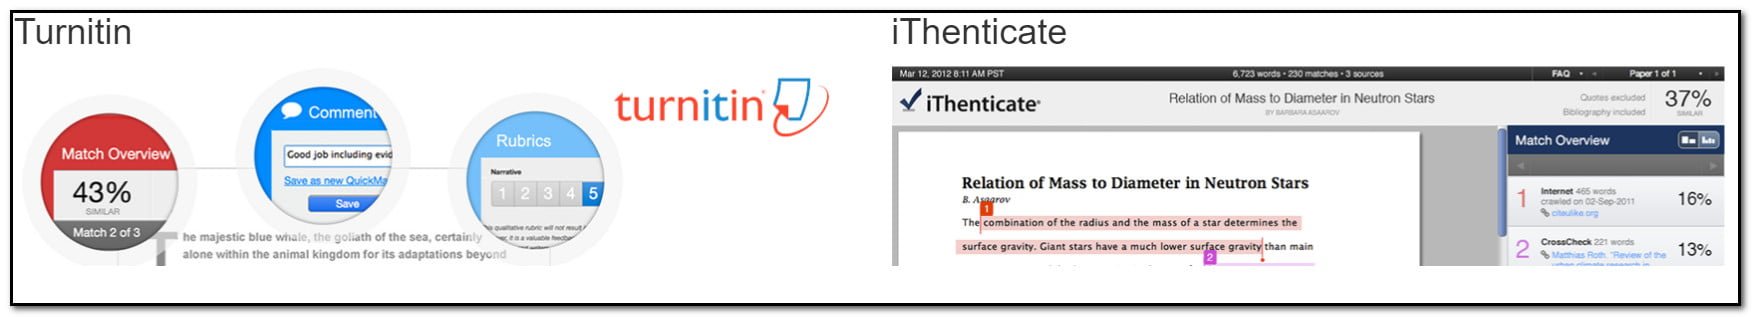 ithenticate software